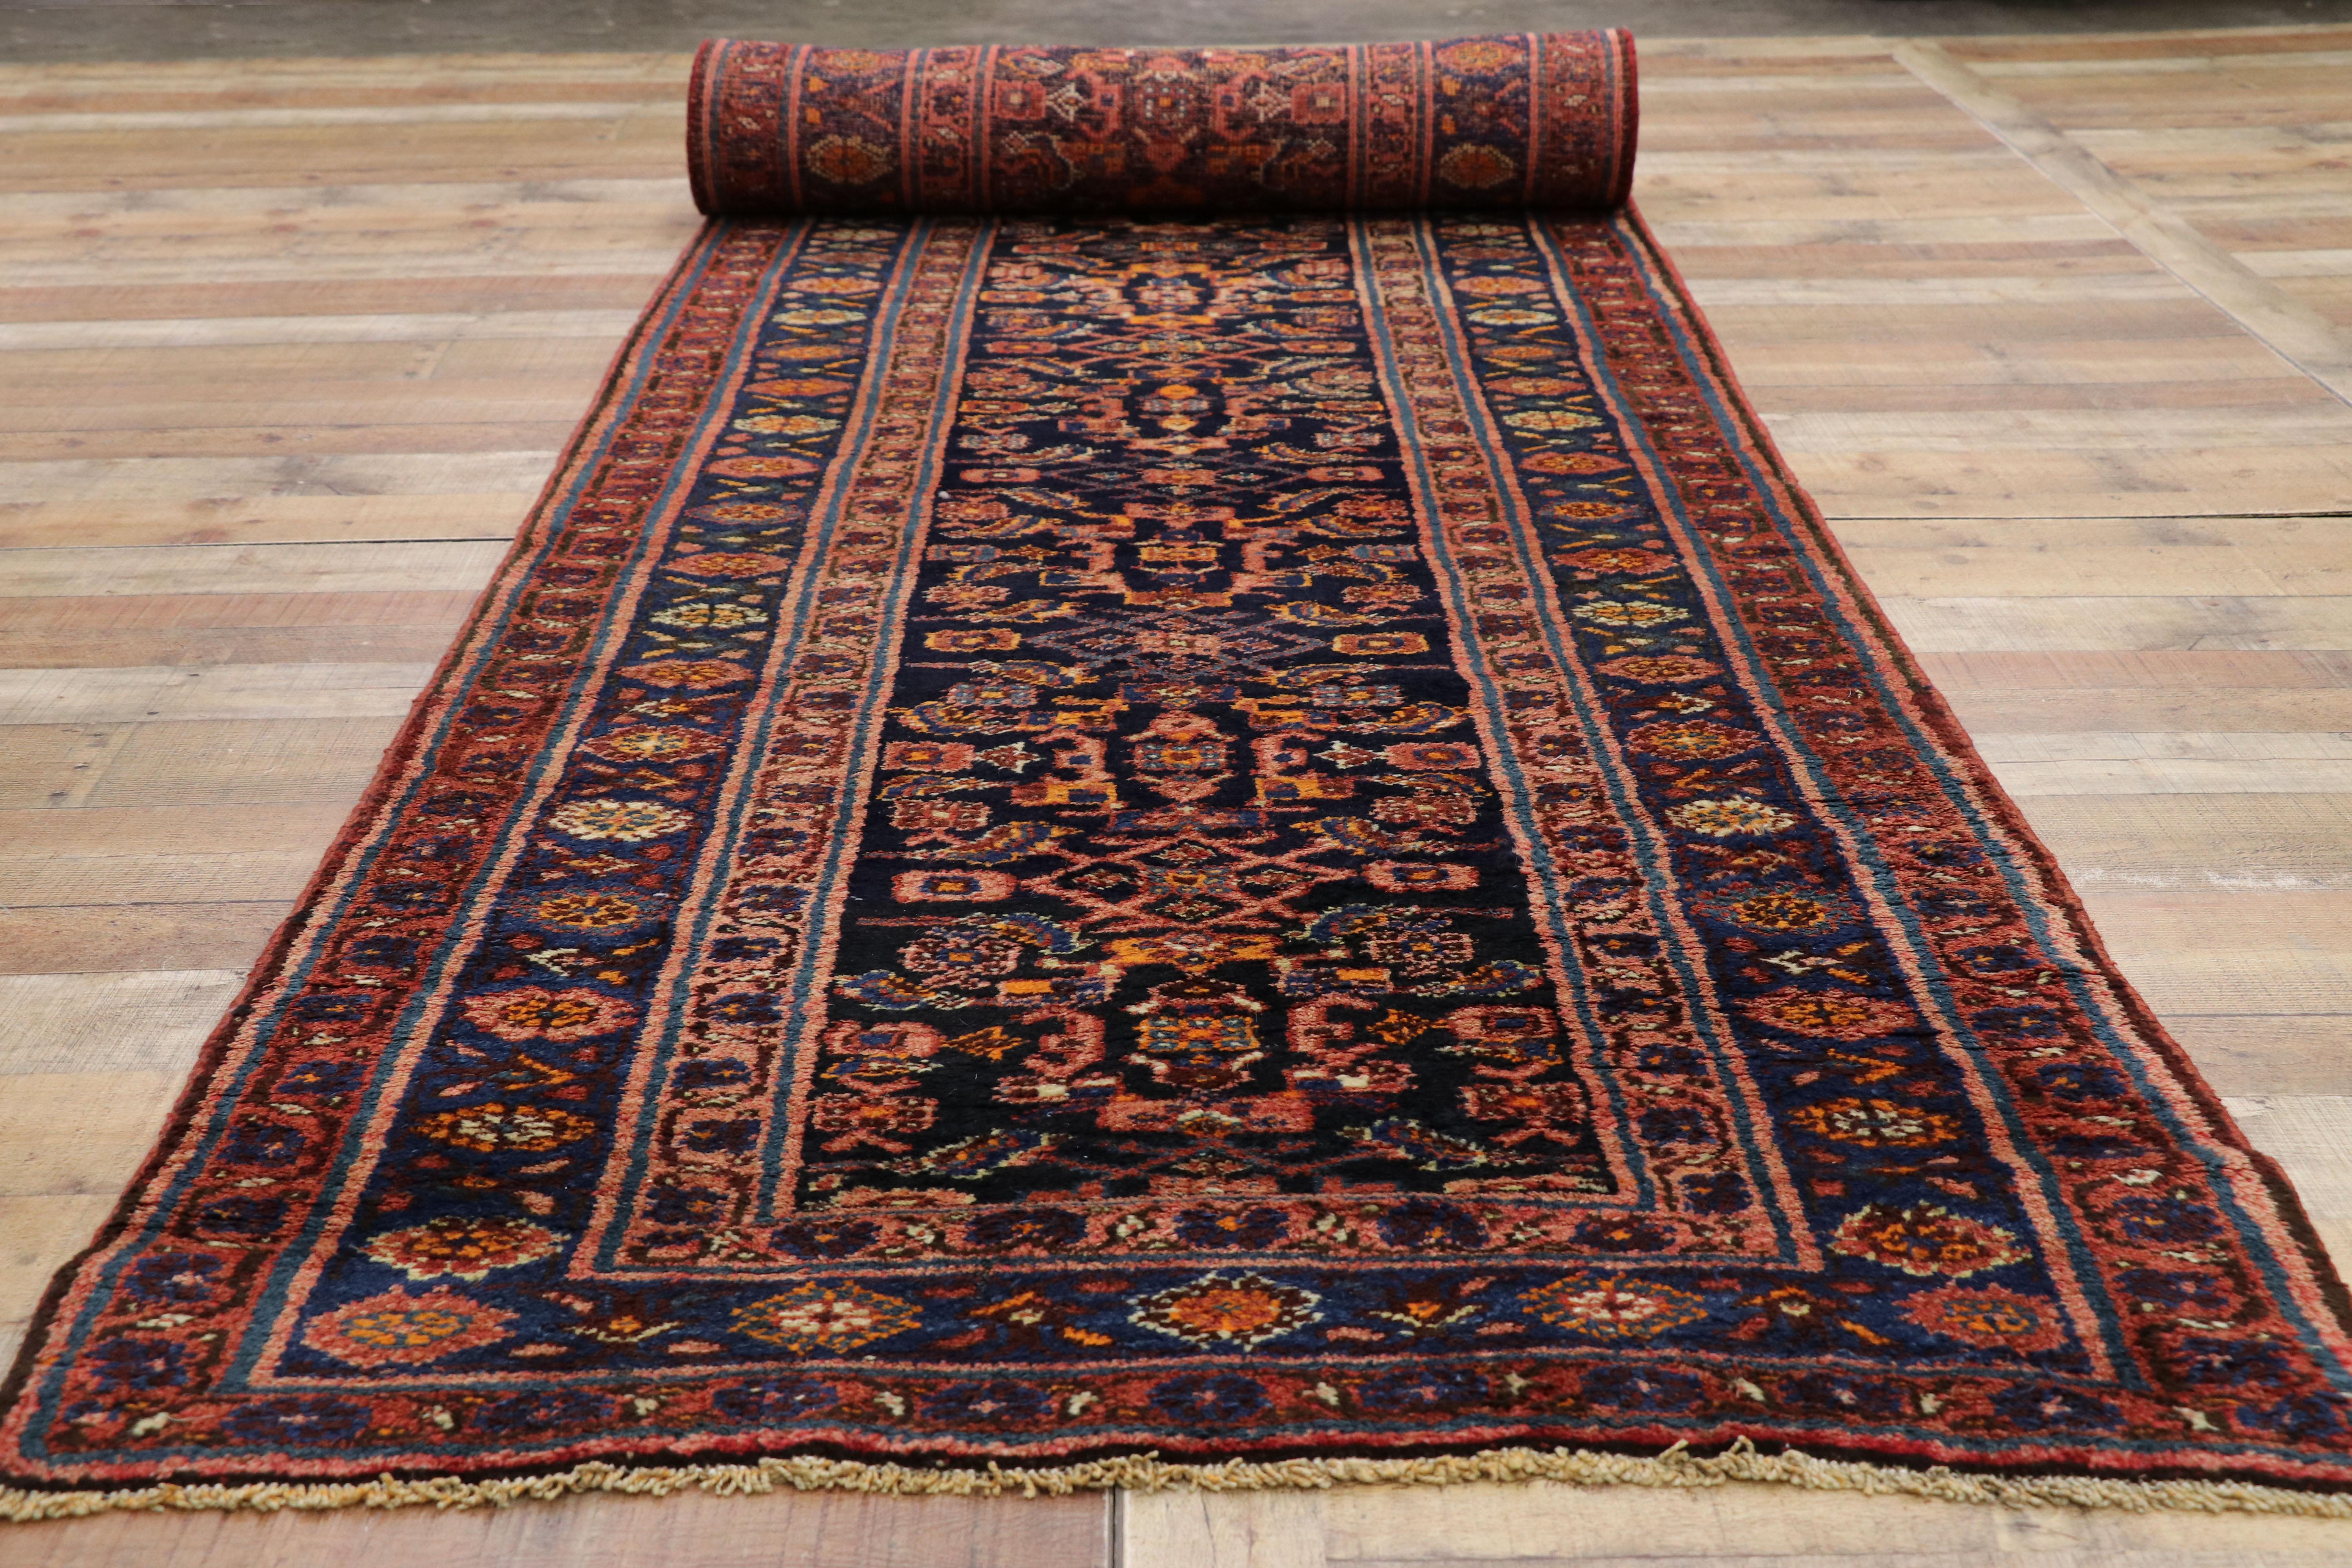 19th Century Late 19th-Century Antique Persian Kurd Runner with Modern Victorian Style